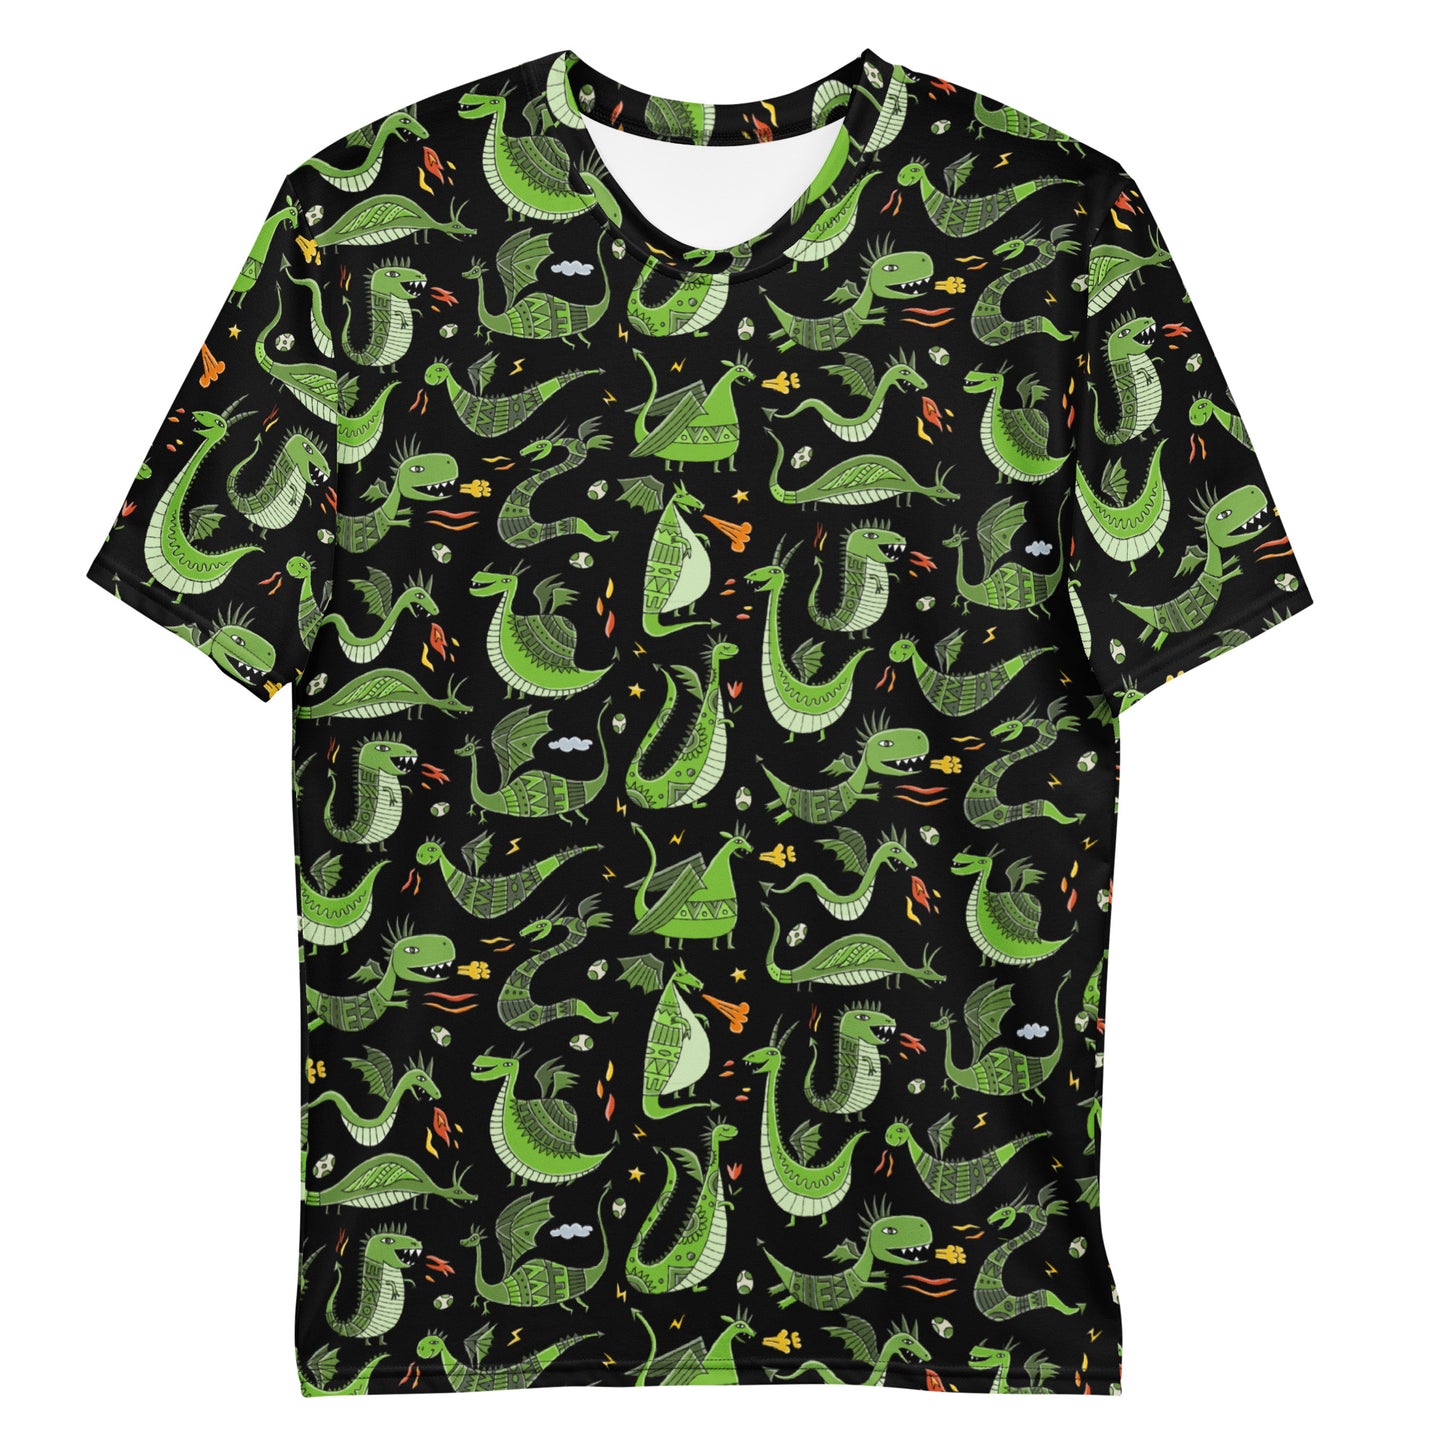 Men's t-shirt black color with funny green Dragons designer print for new year 2024